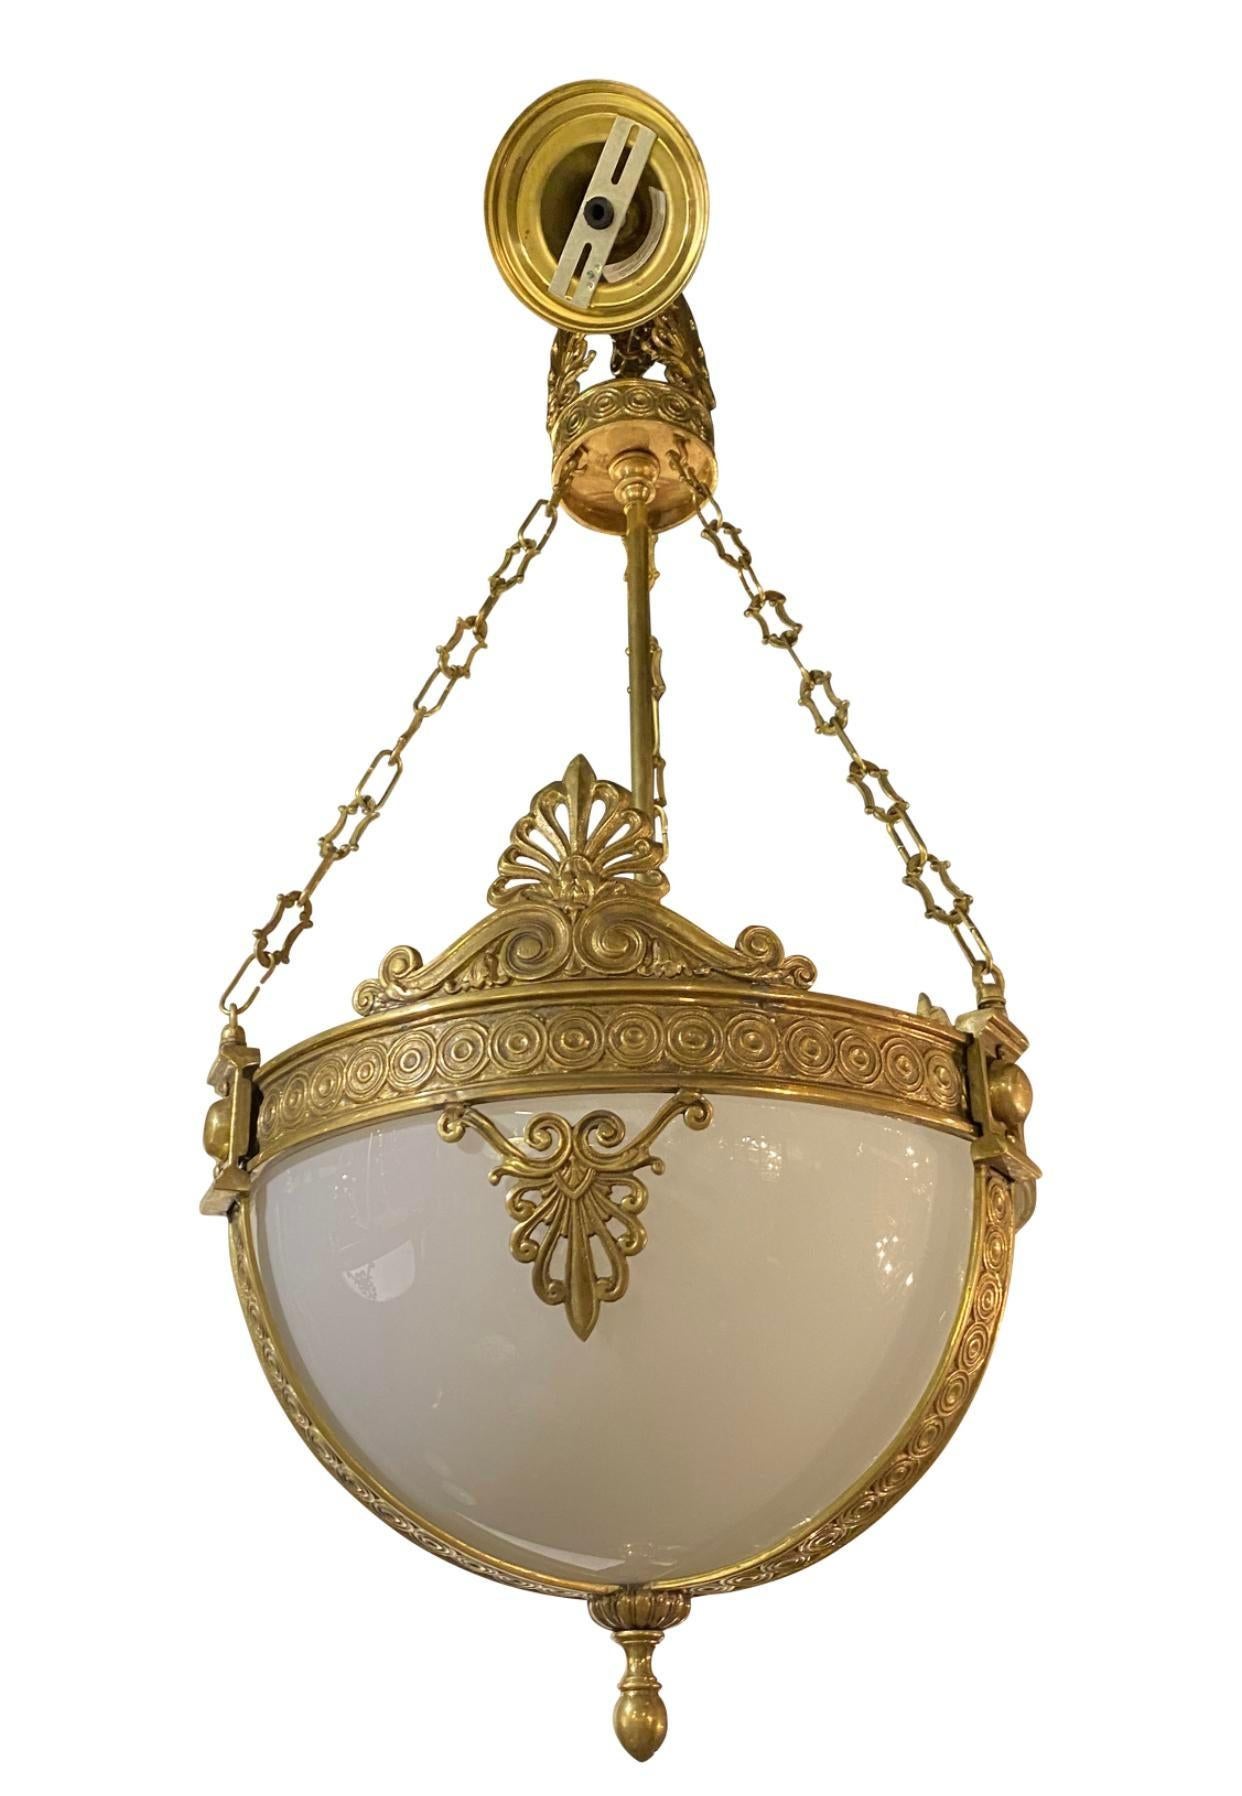 A circa 1920's Caldwell neoclassic style light fixtures with beautiful Opaline glass inset.